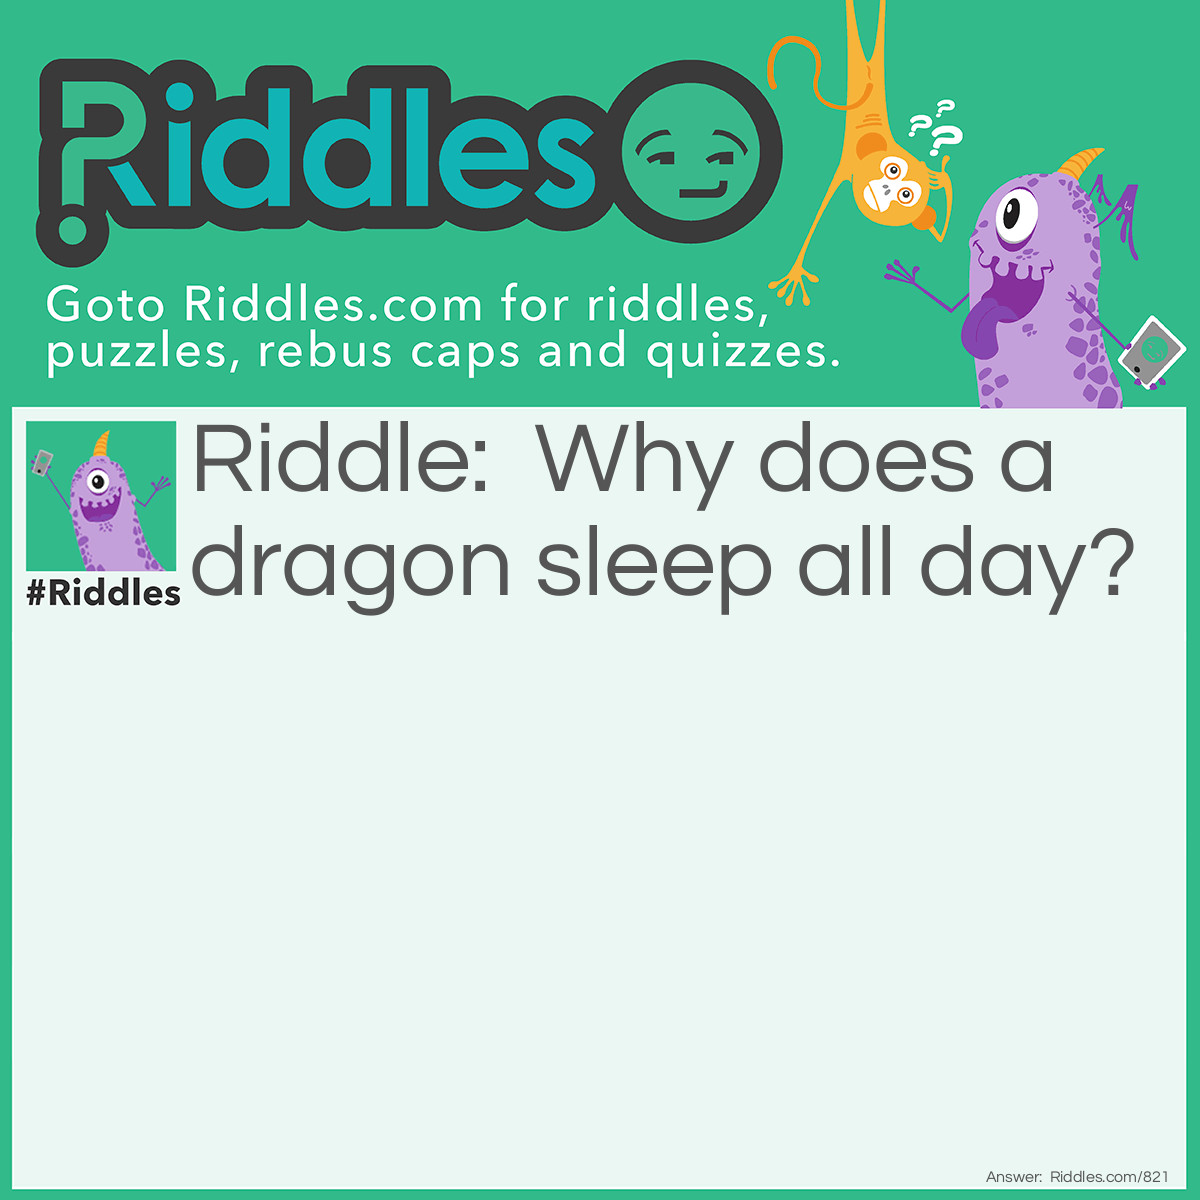 Riddle: Why does a dragon sleep all day? Answer: So it can hunt knights!